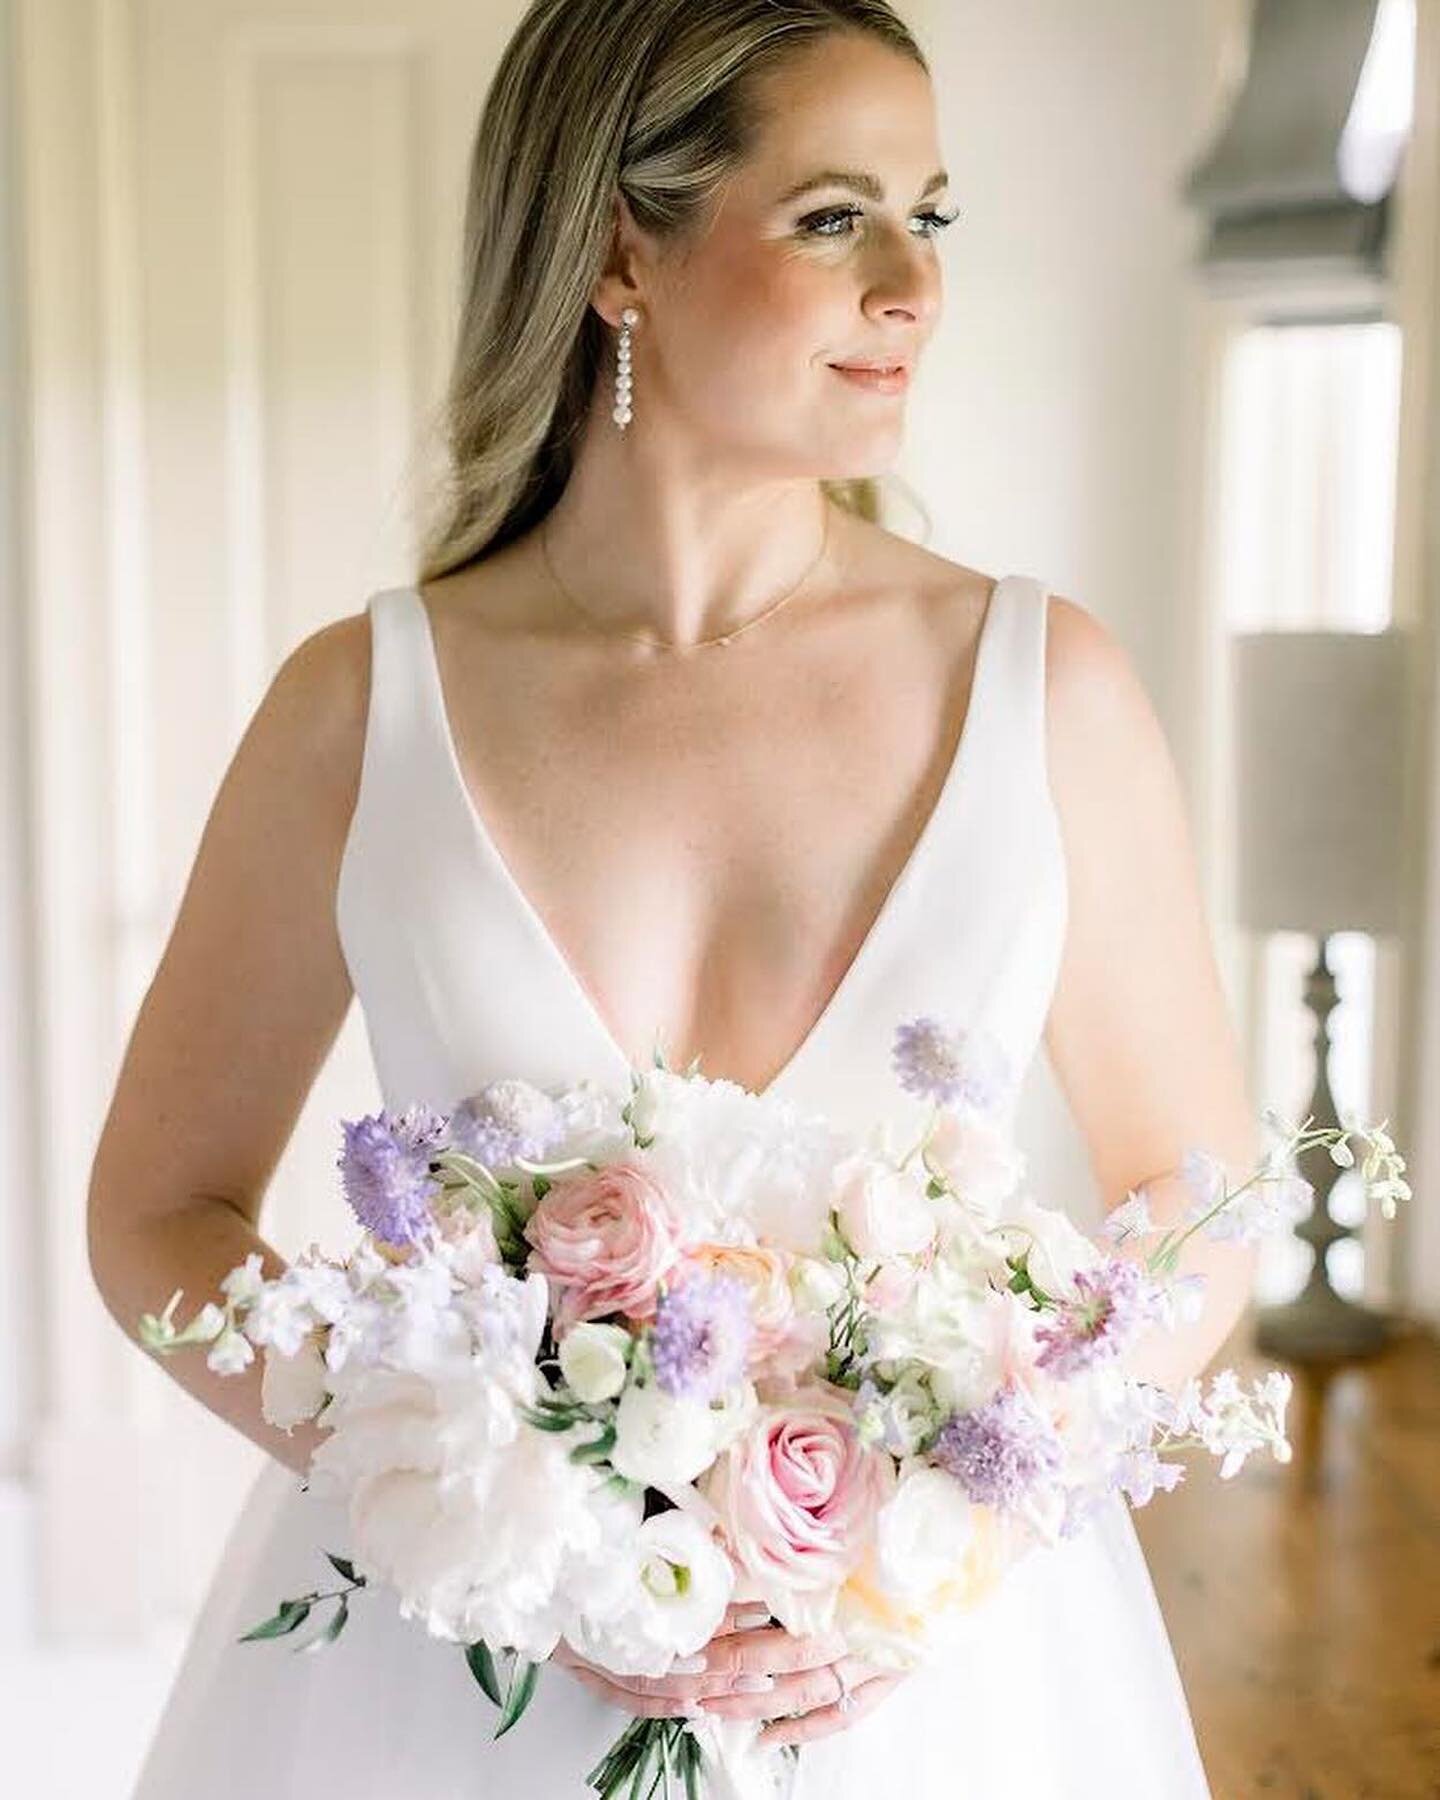 Needed to find a bride with beautiful spring/summer colors to brighten up the day today!! While spring has NOT sprung quite yet, these pics have definitely got us in our spring/summer feels! 🌸🌼
&bull;
Emily &amp; Bryan&rsquo;s wedding looked like t